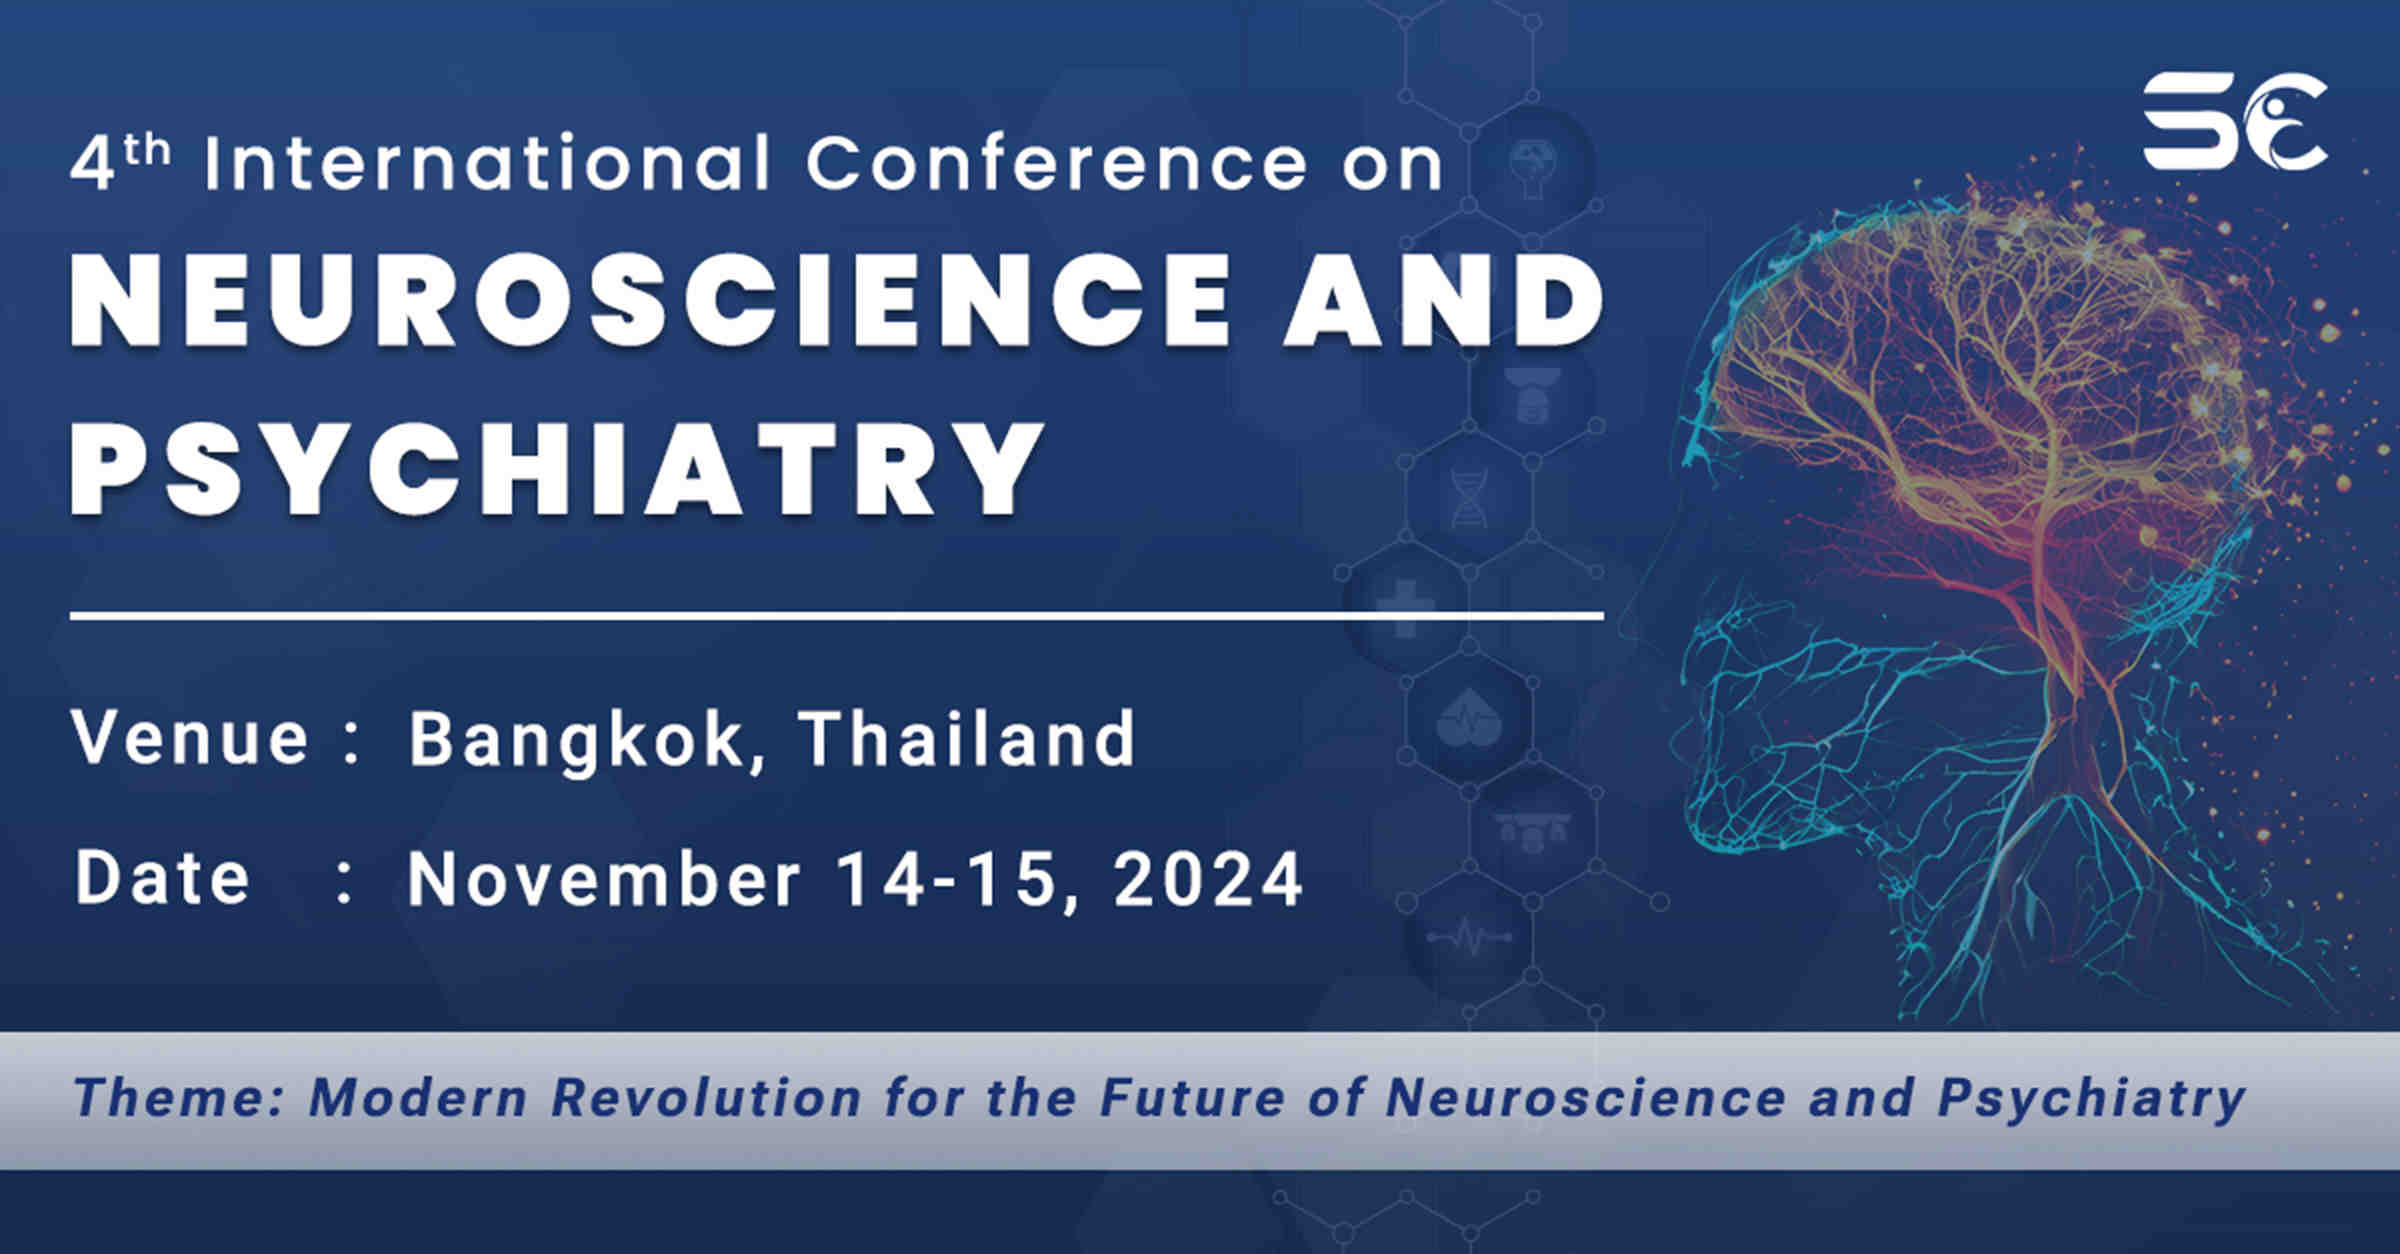 4th International Conference on Neuroscience and Psychiatry